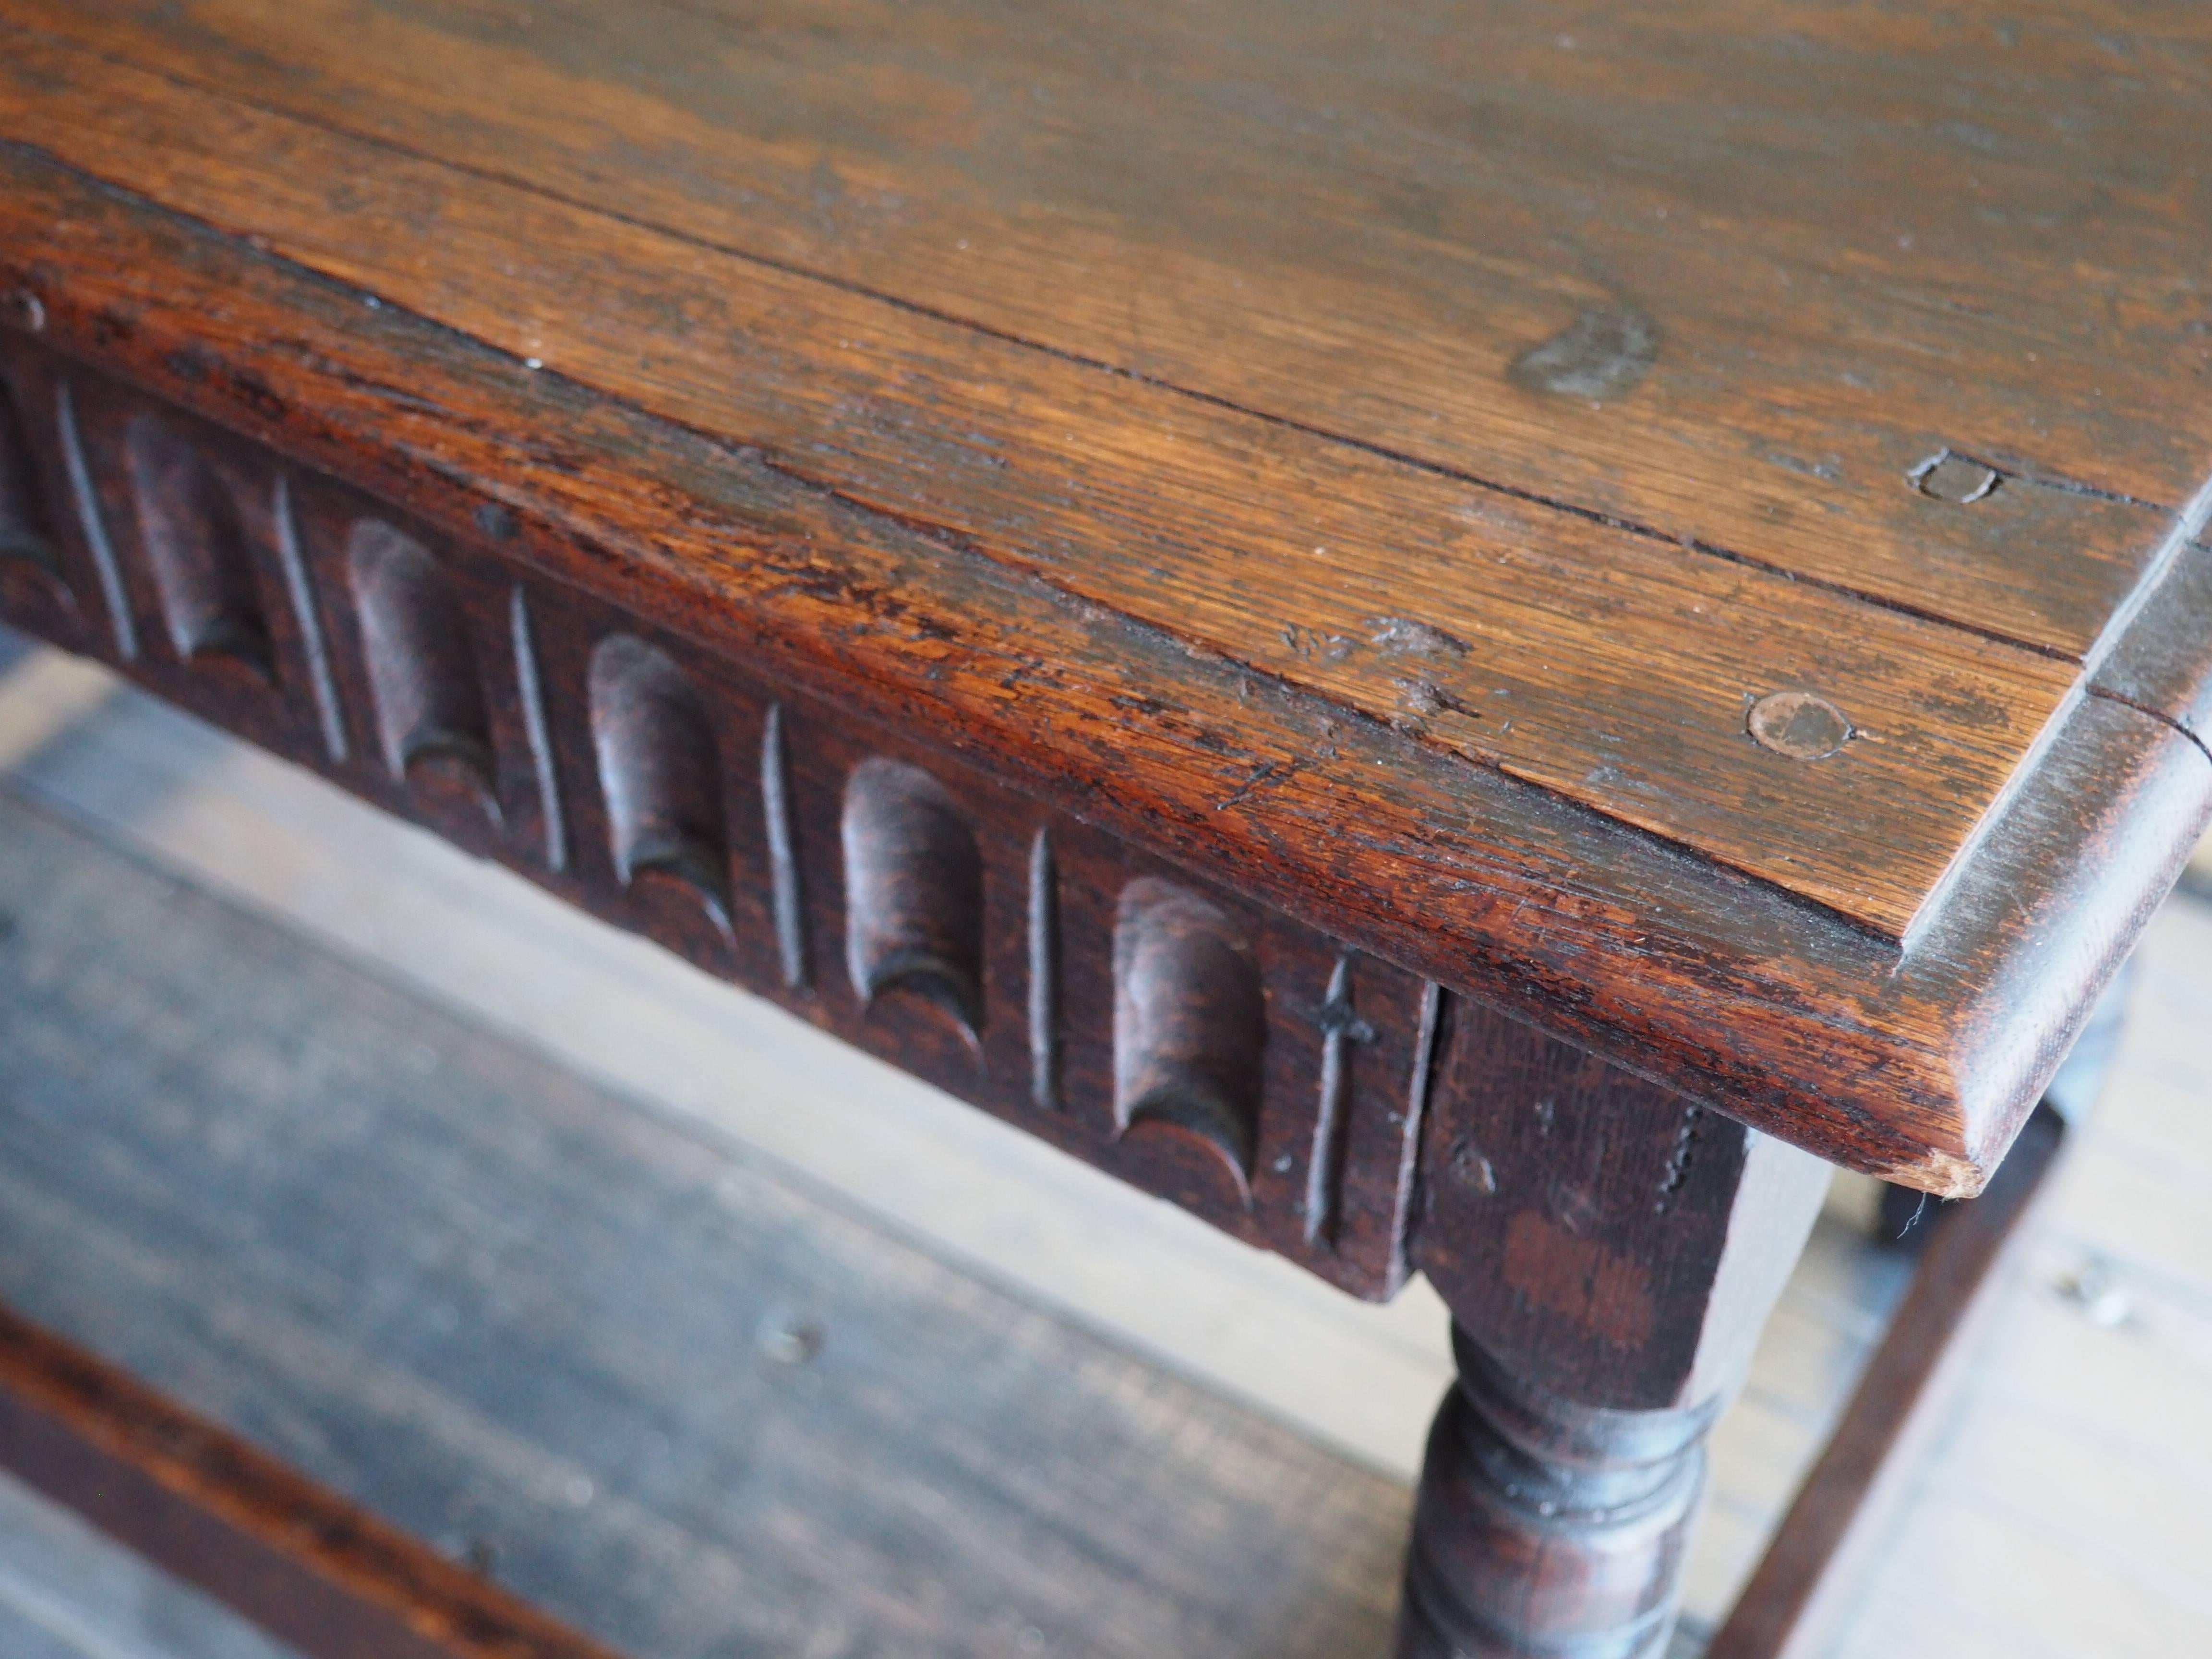 This Antique bench table with drawer from the 1700s is a very usable size for many applications.